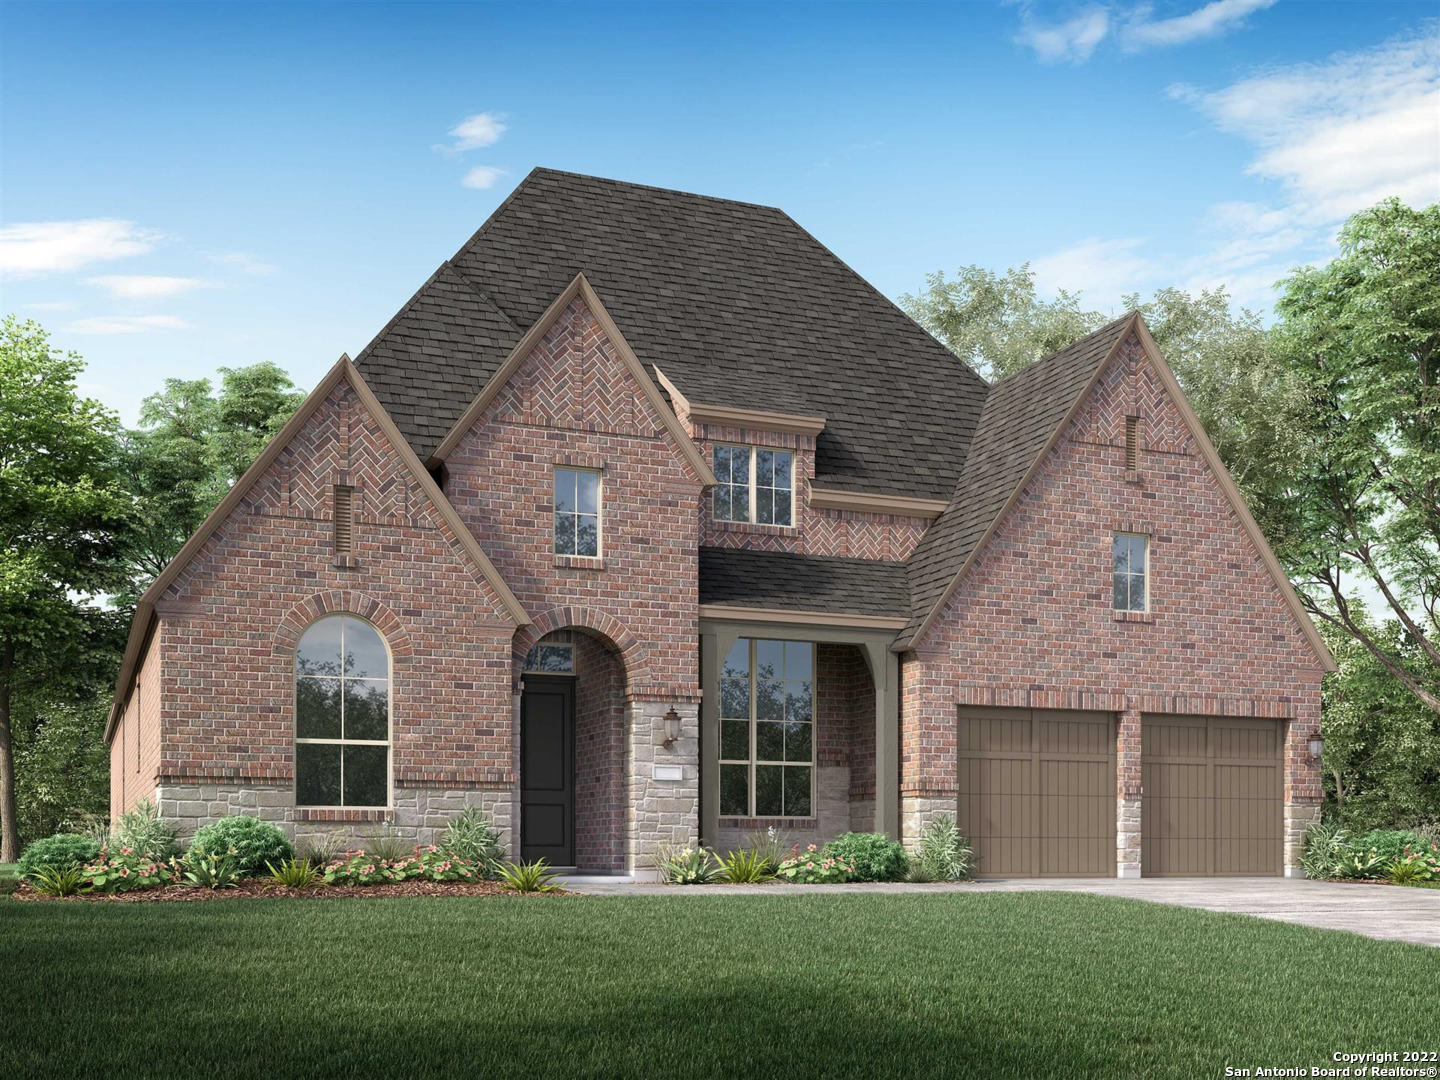 MLS# 1620117 - Built by Highland Homes - June completion! ~ This ONE level brick home features wood floors, built in hutch, freestanding tub, 12' ceilings and double front doors. Enjoy your space in the entertainment room, home office  or extended outdoor living space. Home to be completed by June 2023.